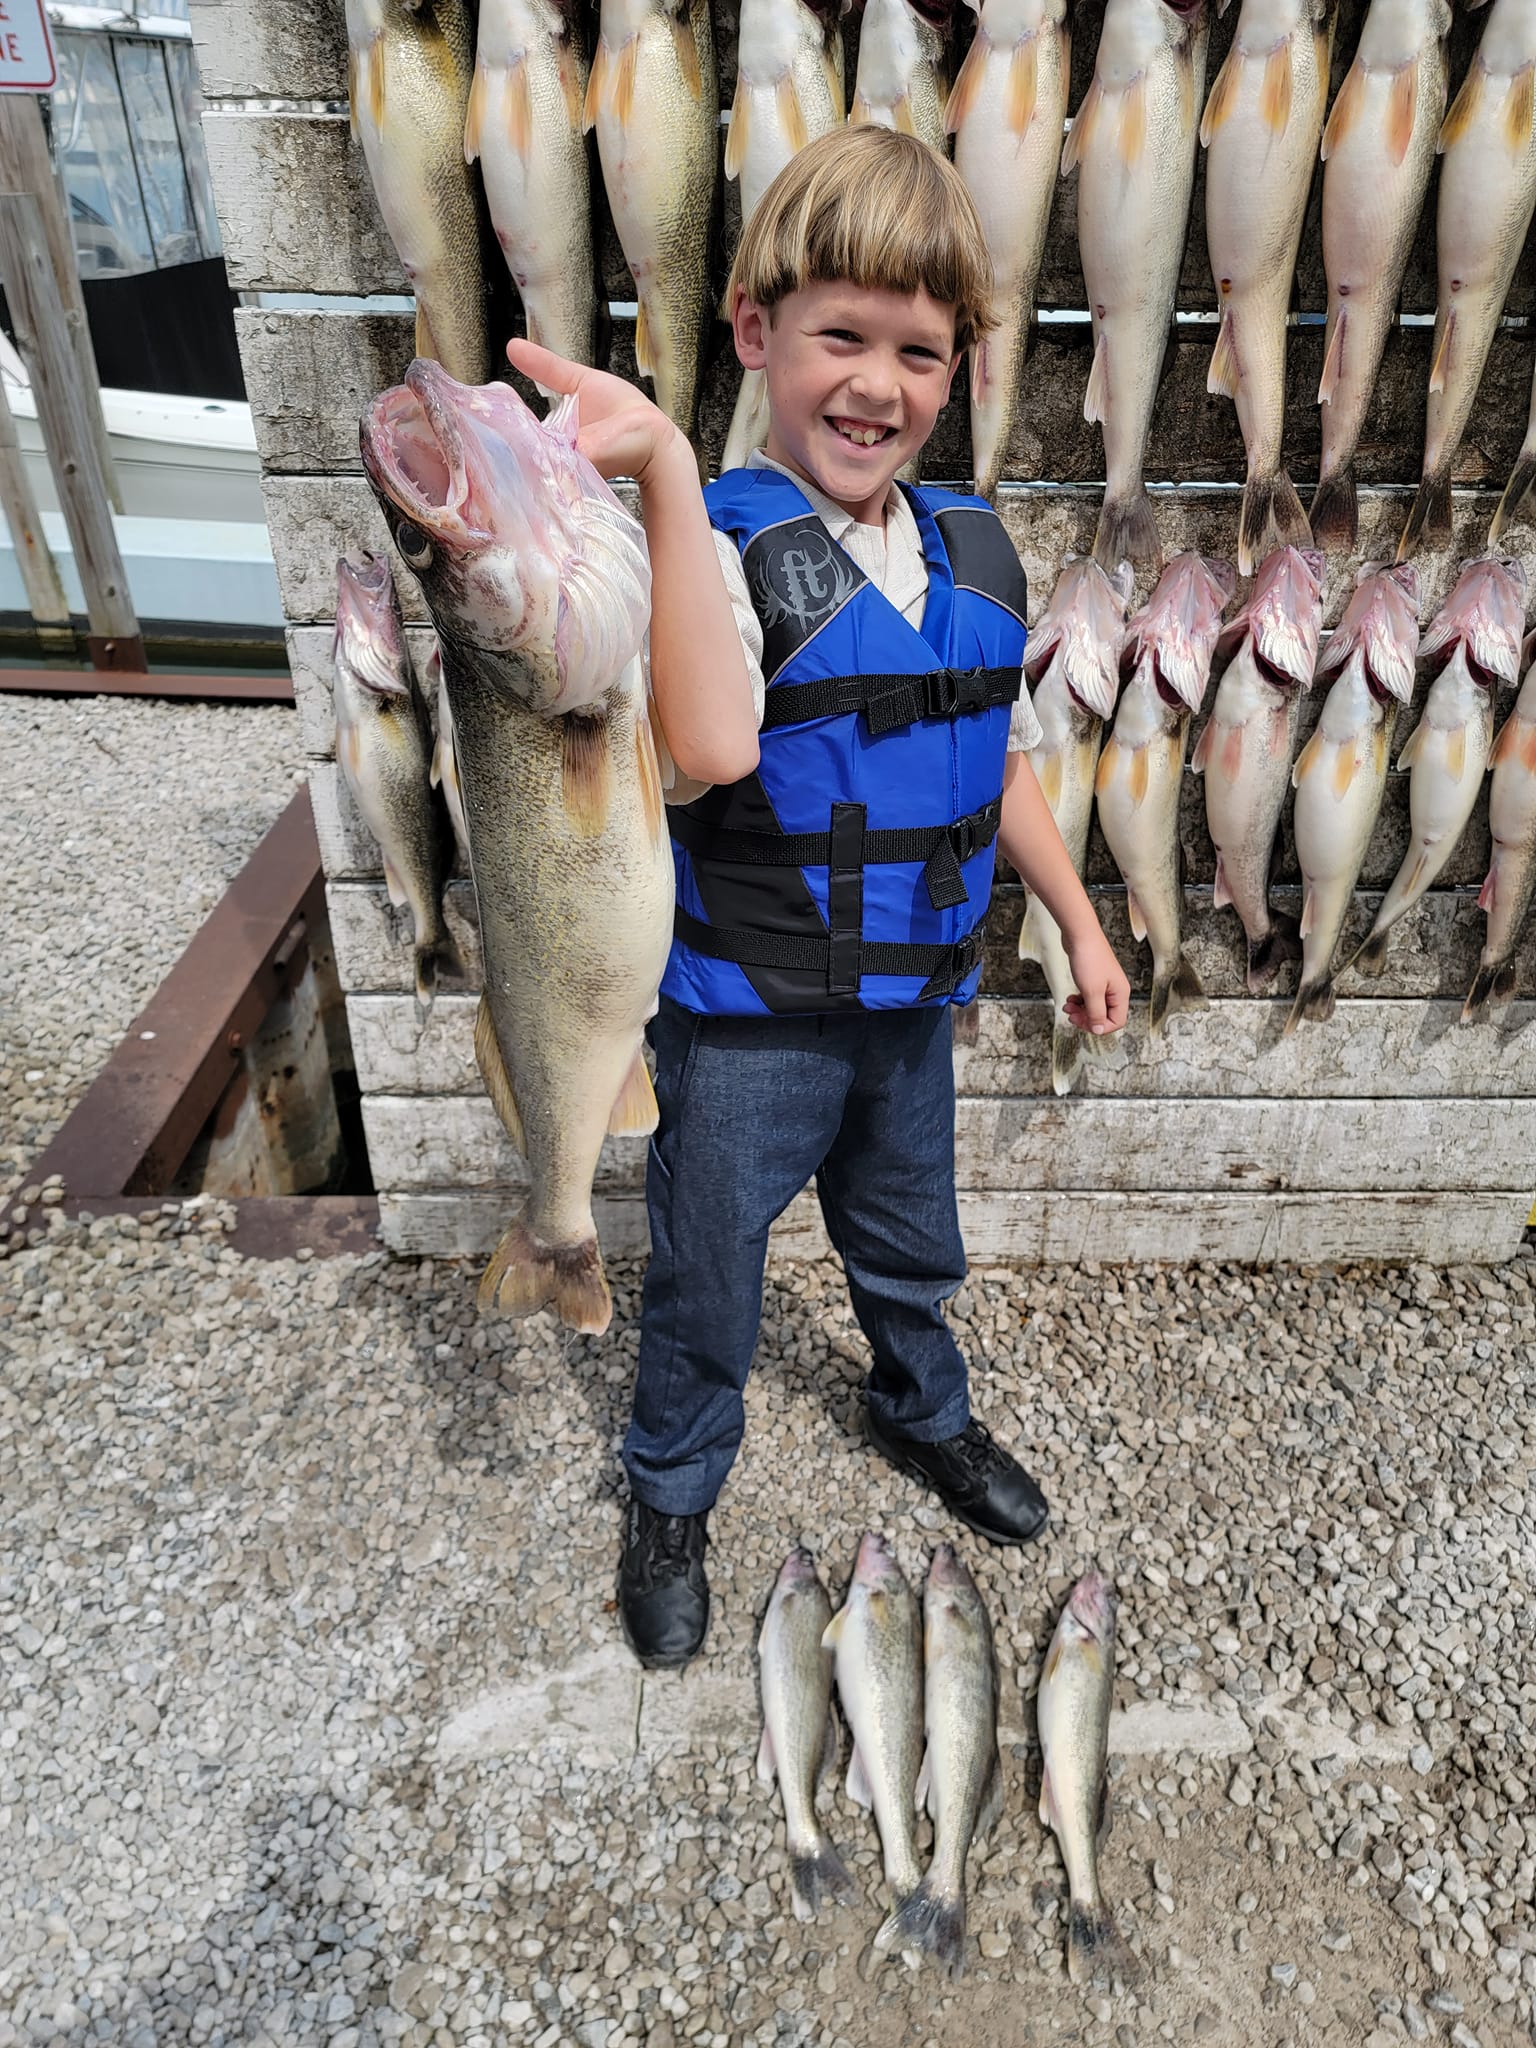 Lake Erie Walleye Fishing Report 5.23.22 - Blue Dolphin Walleye Charters Lake  Erie Walleye Fishing Report, May 23rd